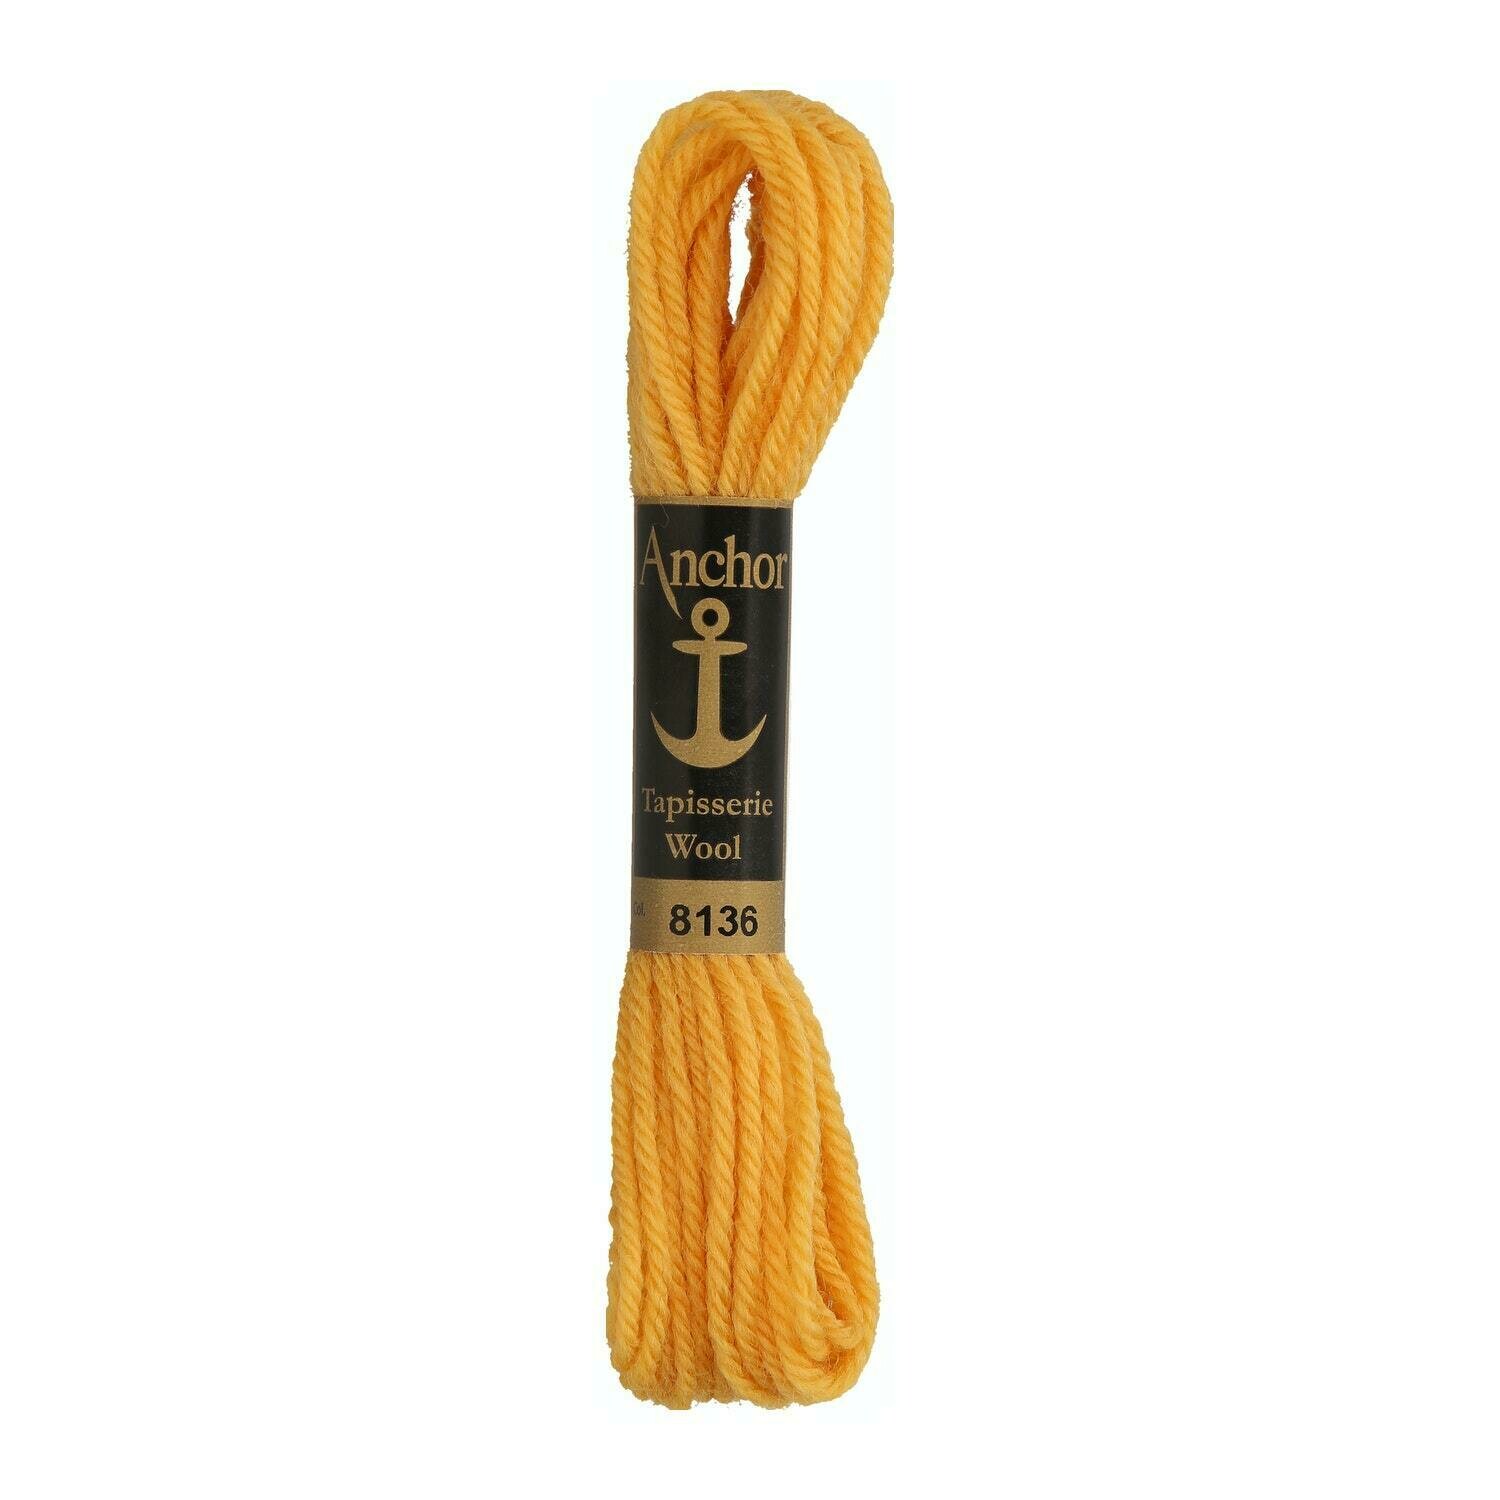 Anchor Tapisserie Wool #08136